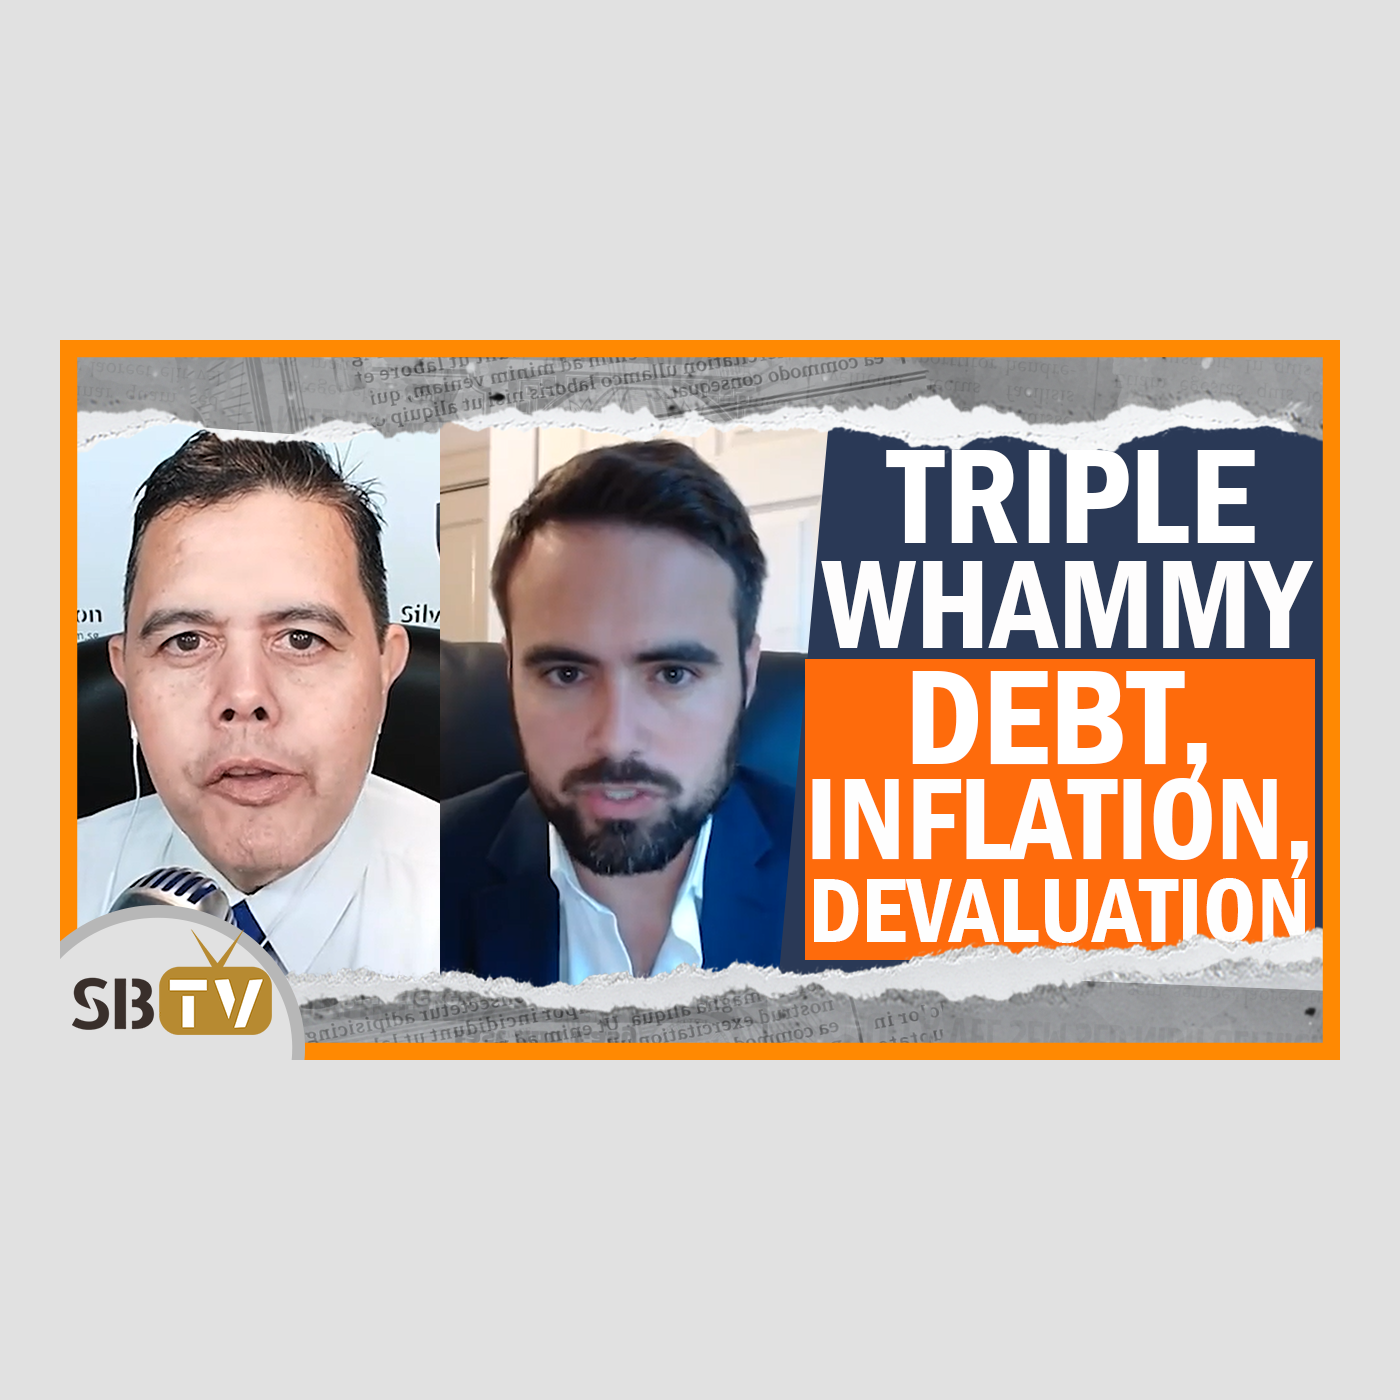 222 Tavi Costa - We Now Have Trifecta of 40s' High Debt Load, 70s' Inflation and 90s' Overvaluation